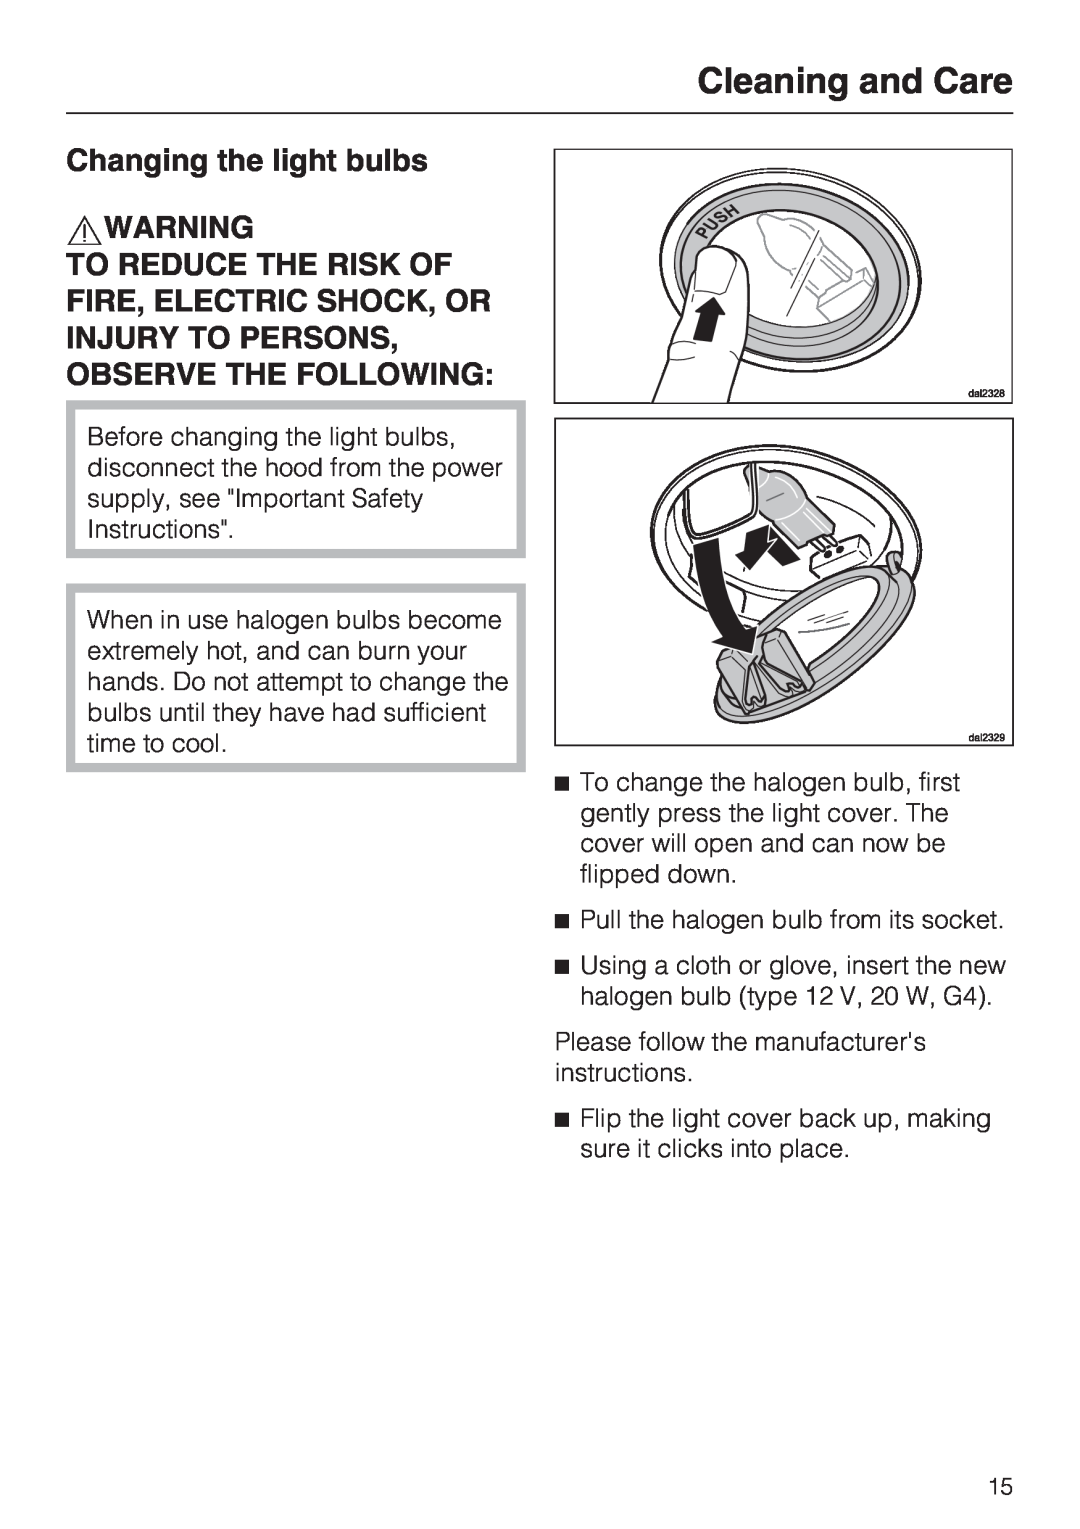 Miele DA 390-5 installation instructions Changing the light bulbs, Cleaning and Care 